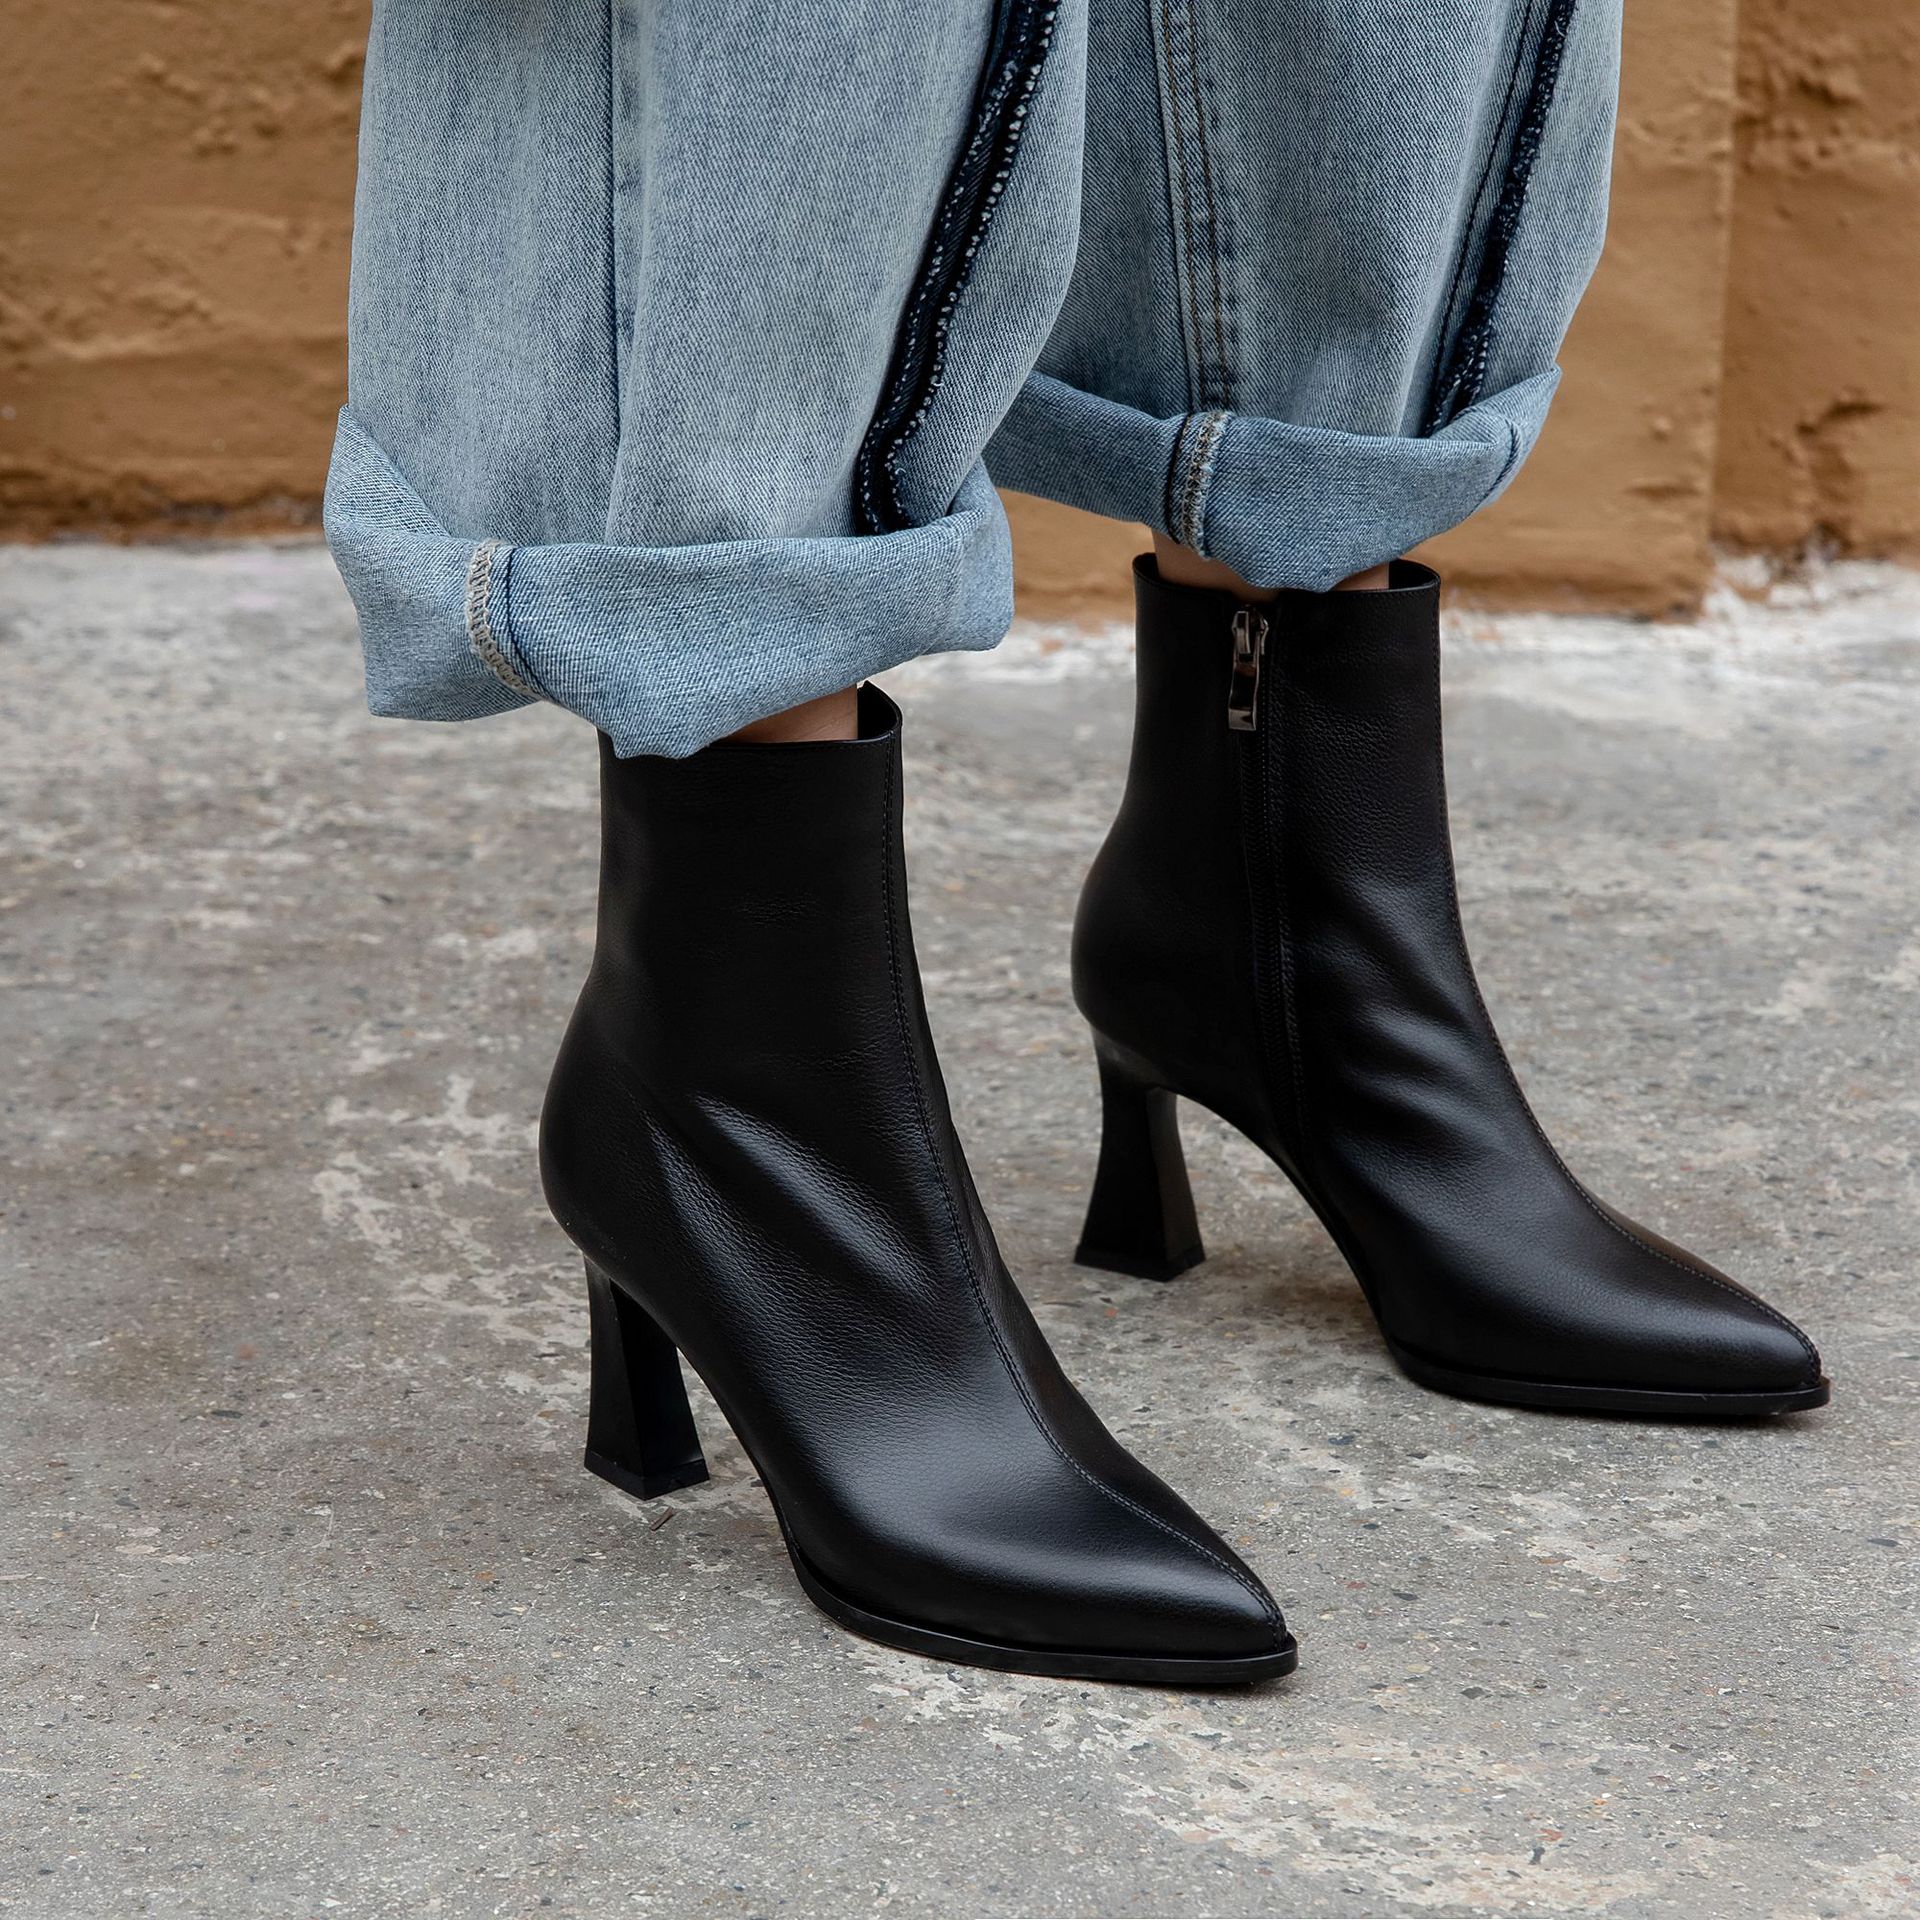 Chiko Teona Pointed Toe Curved Heels Boots